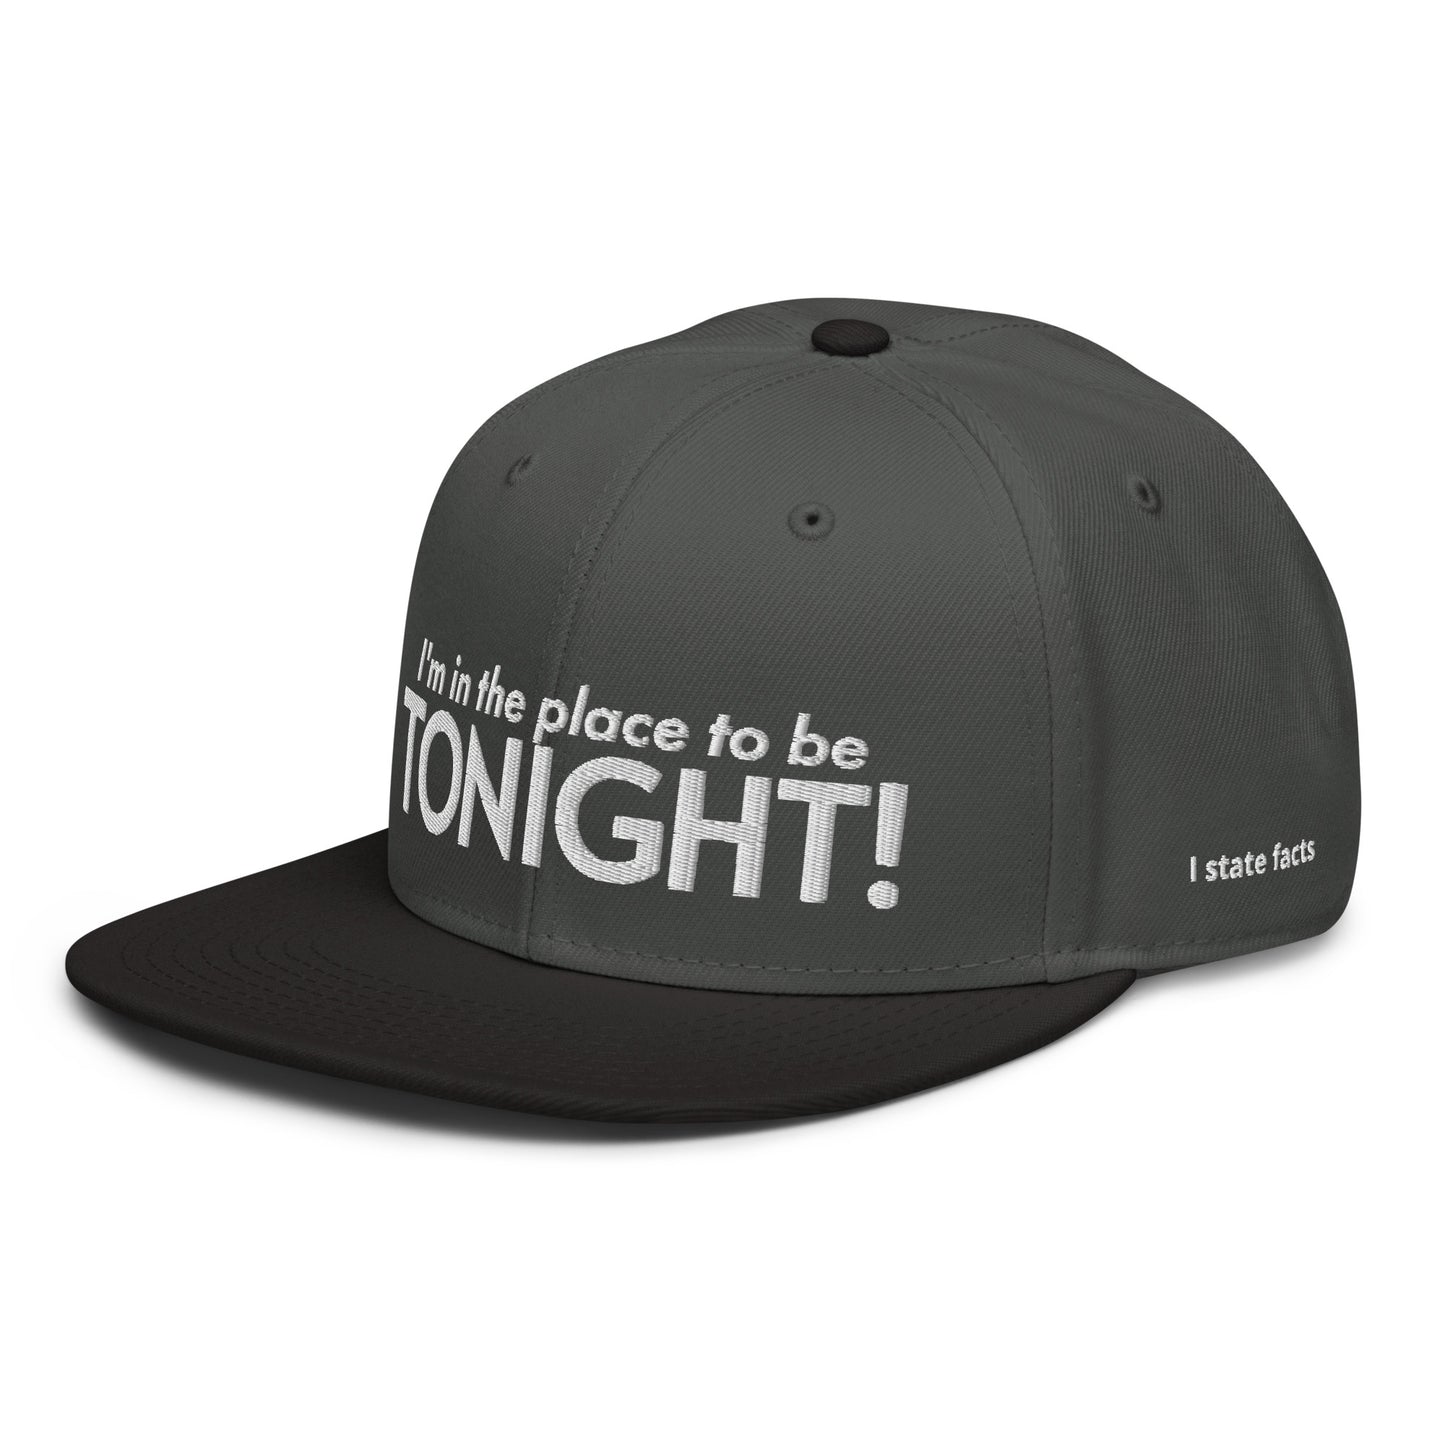 MAAT FOREVER TONIGHT Snapback Hat